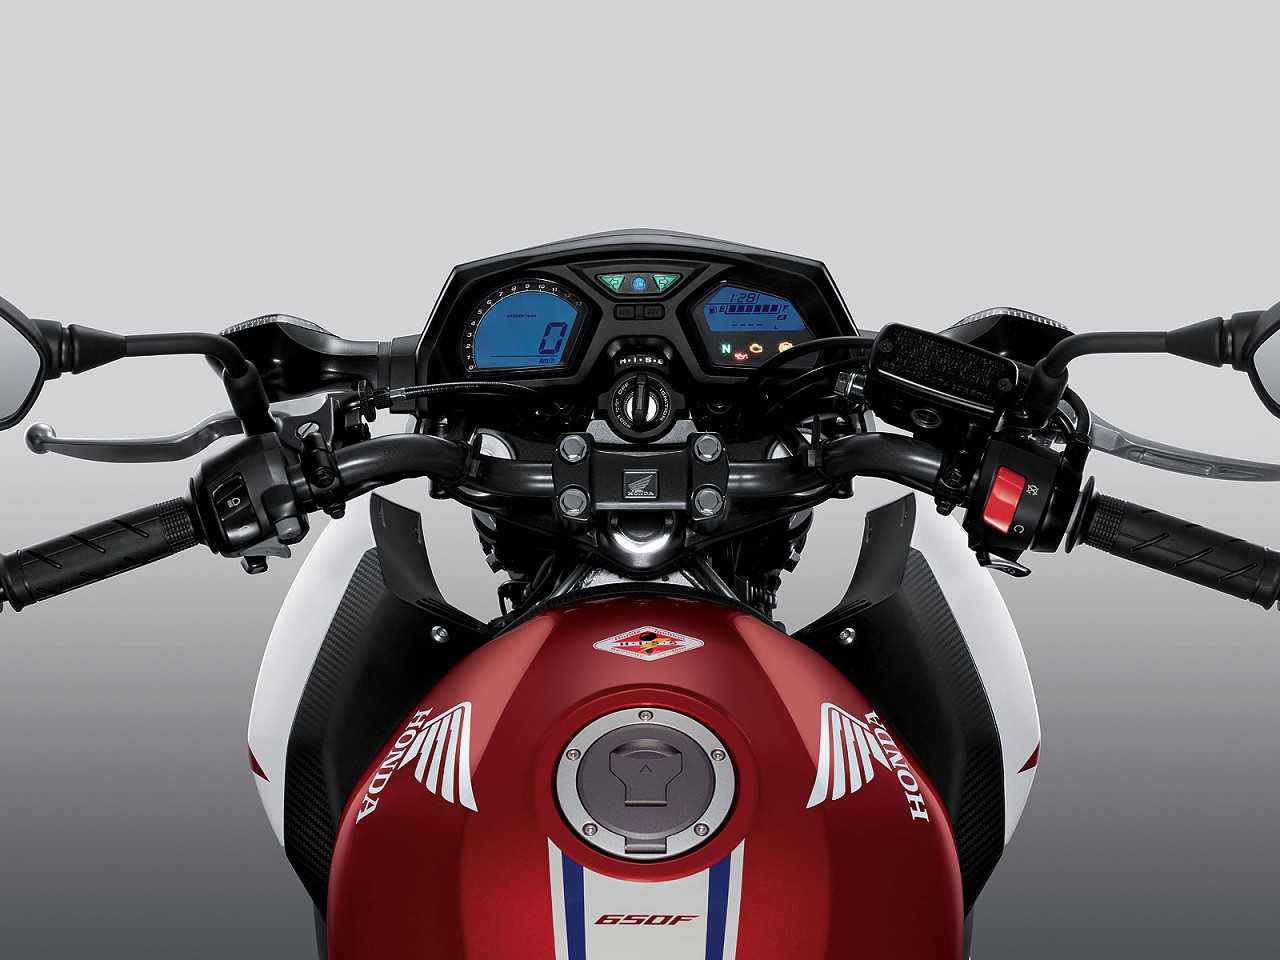 HondaCB 650F 2017 - painel